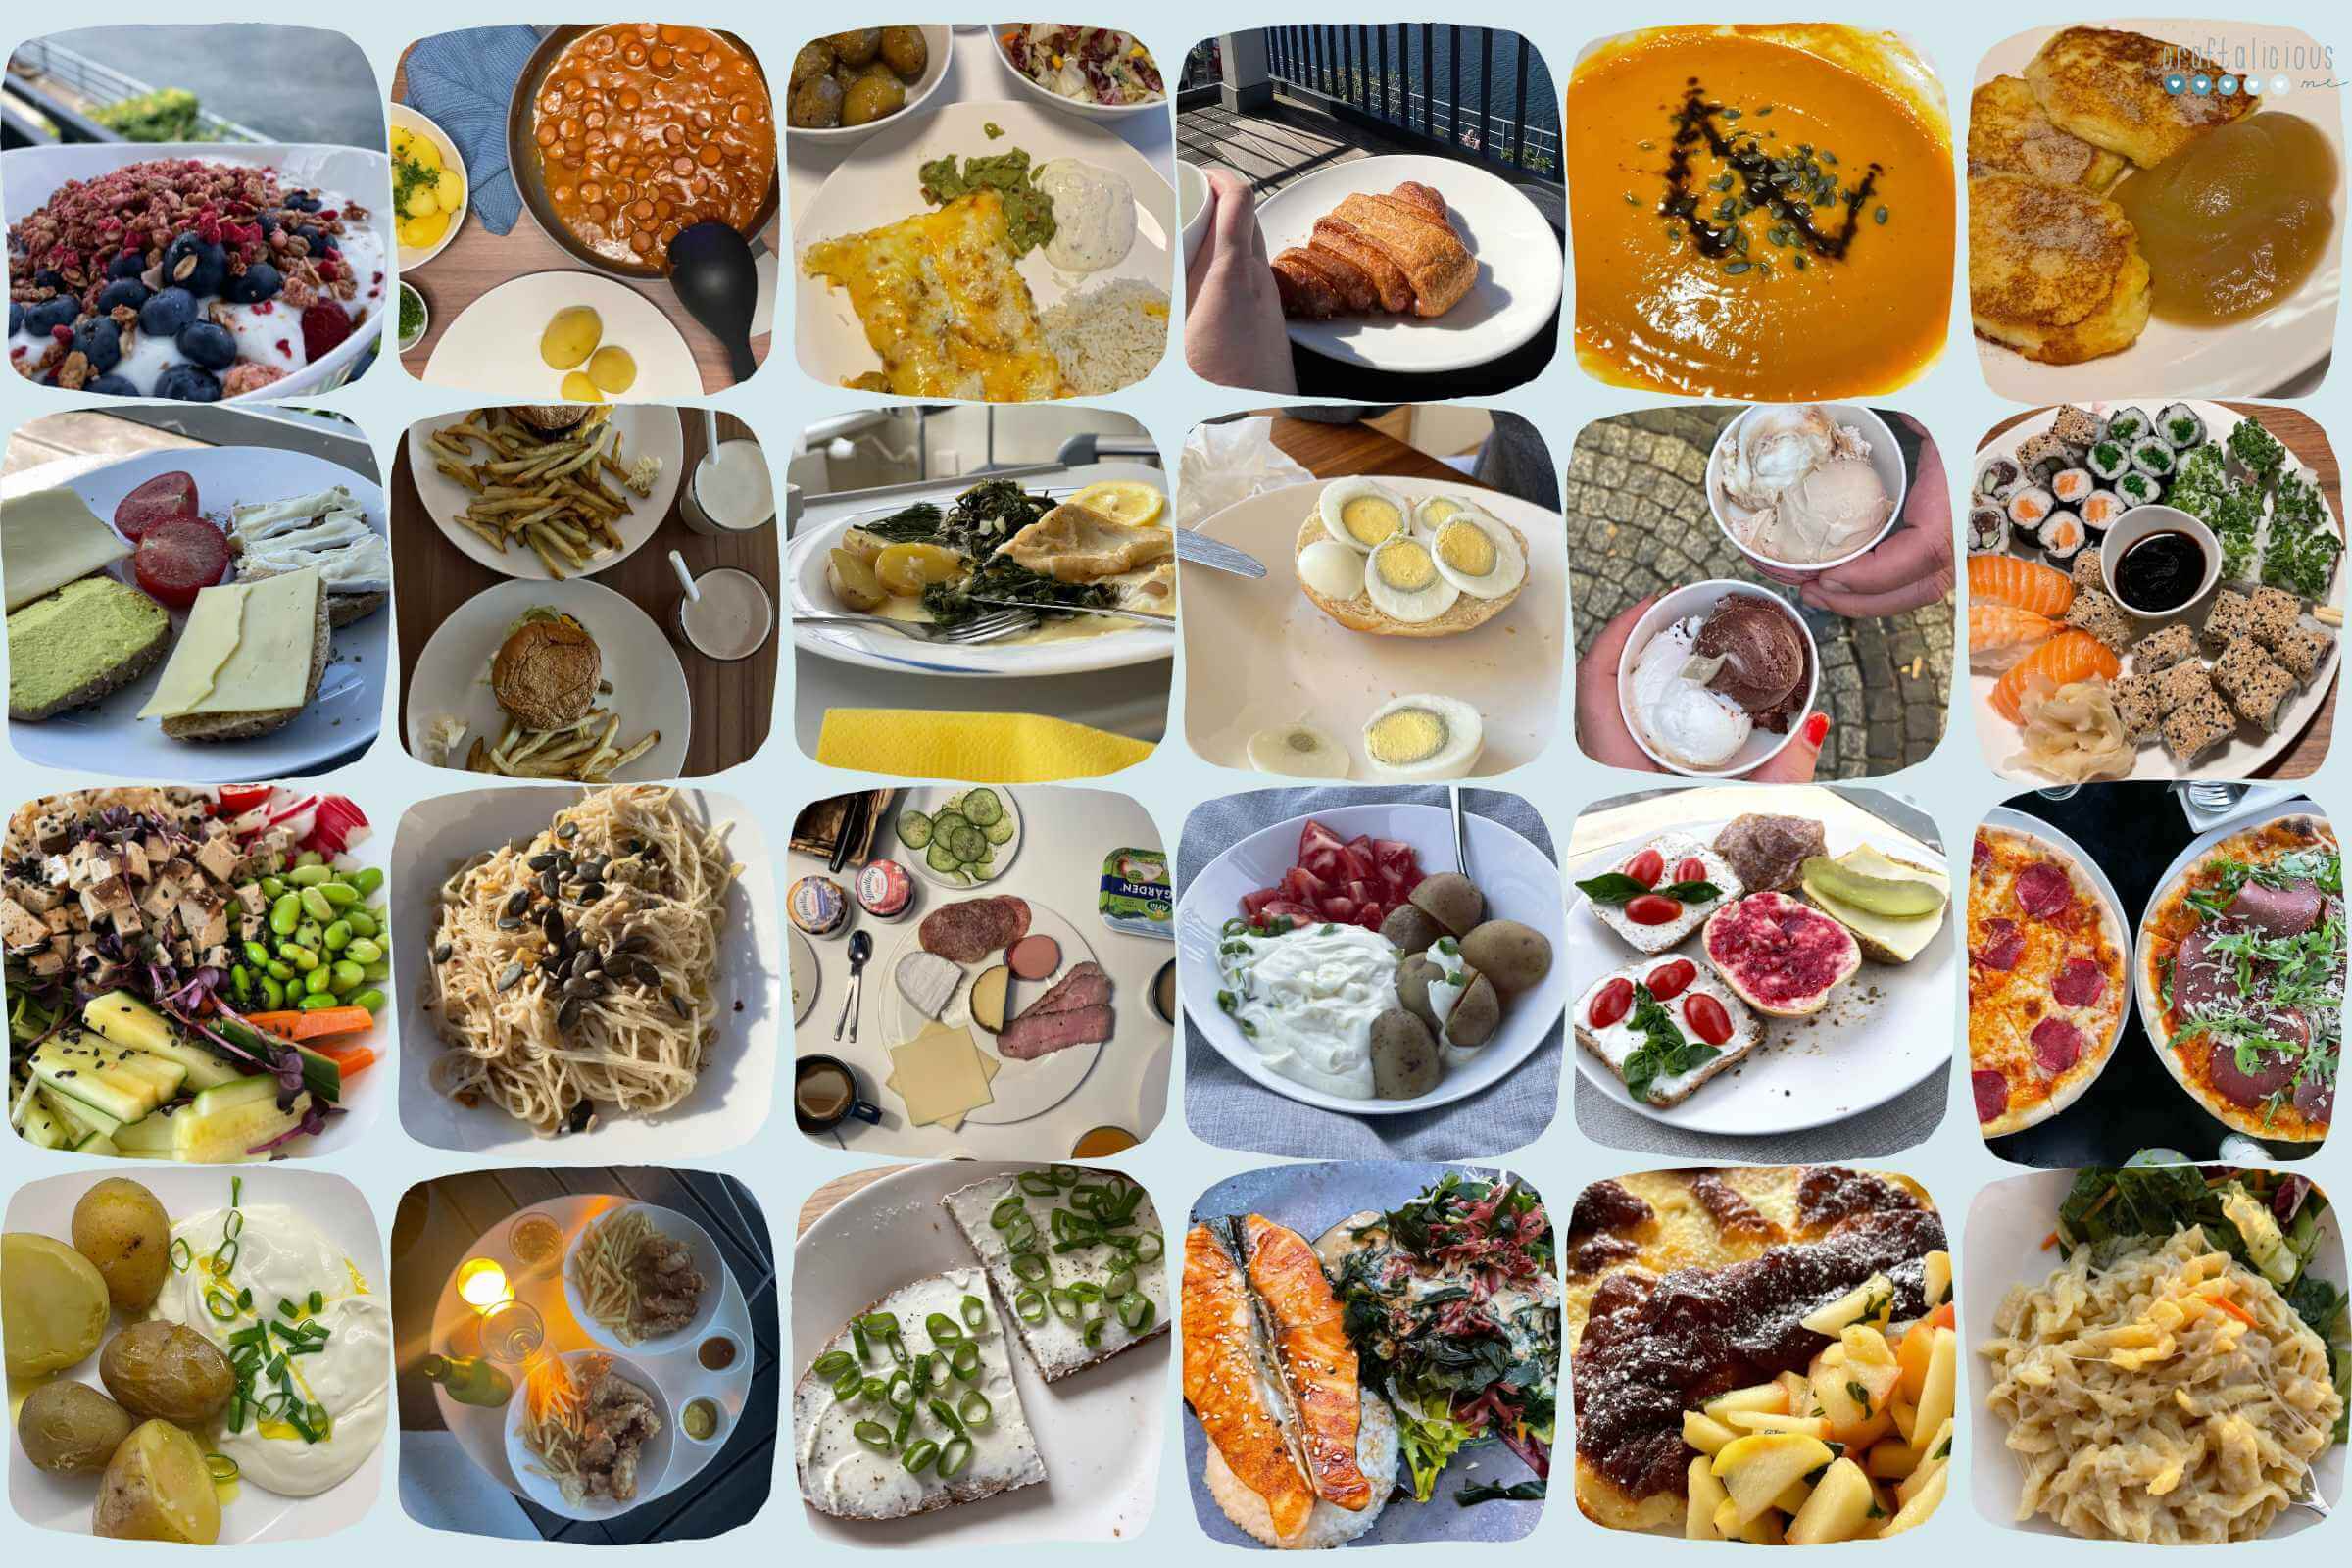 foods of the year 2022 selection of dishes